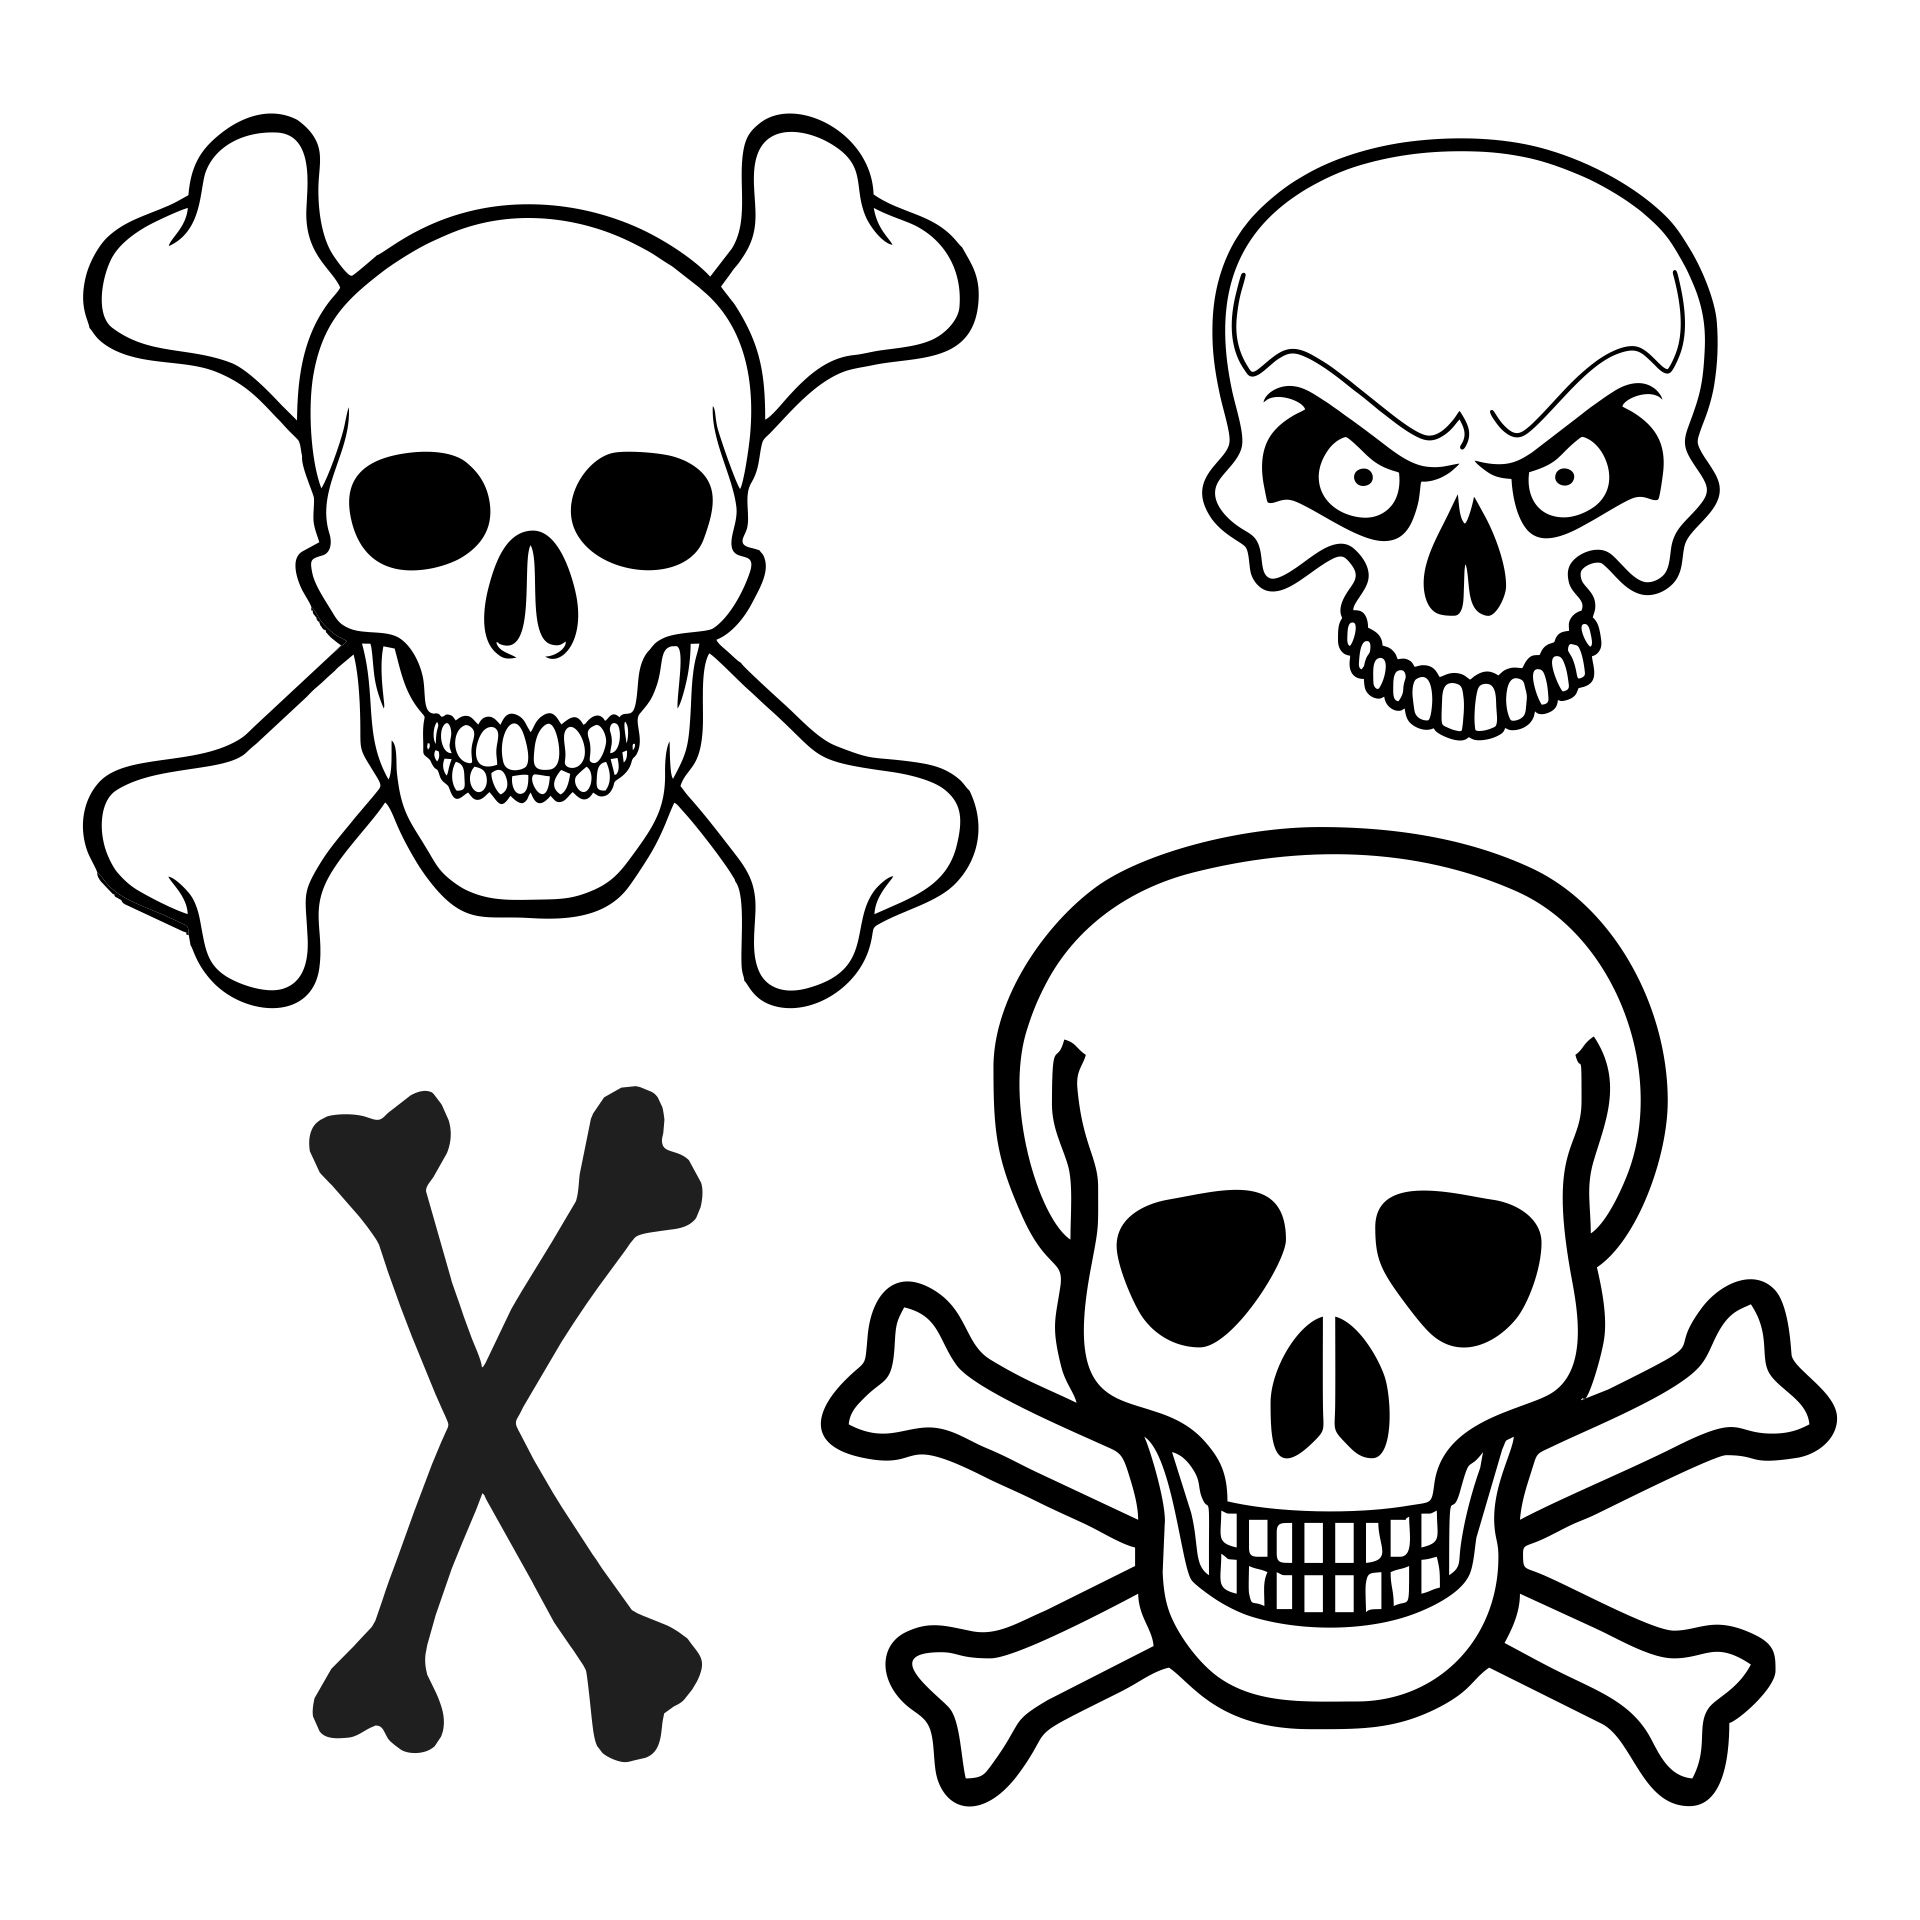 4 Best Images of Printable Pirate Skull And Crossbones Printable